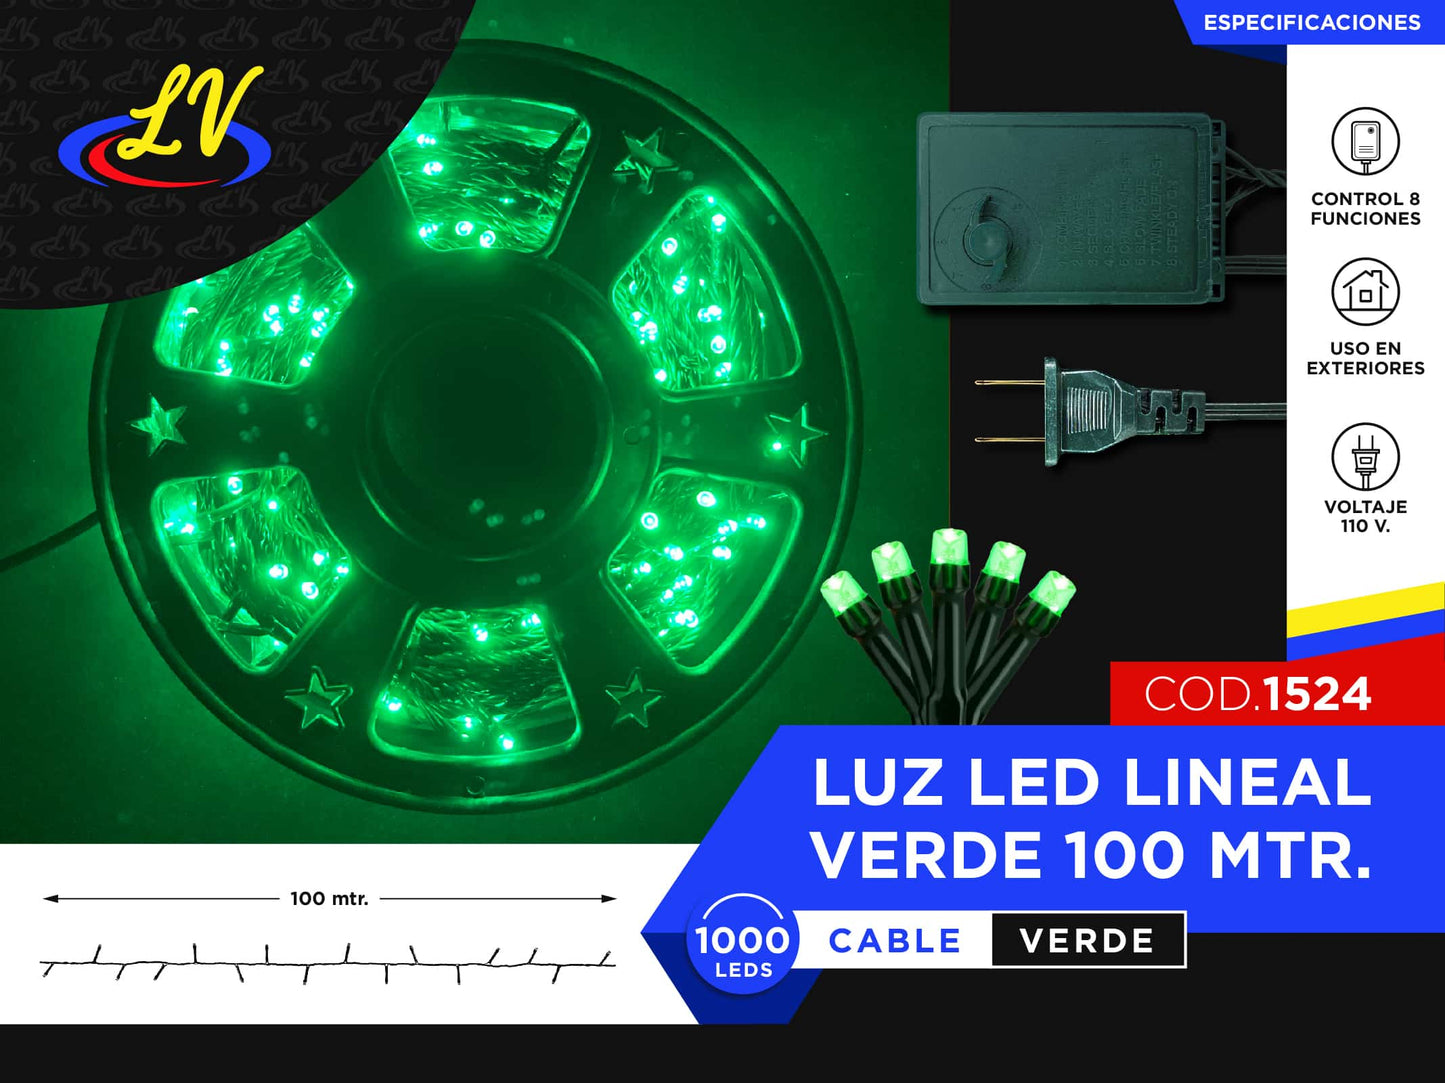 LINEAL TIPO UL – VERDE – 100 MTS